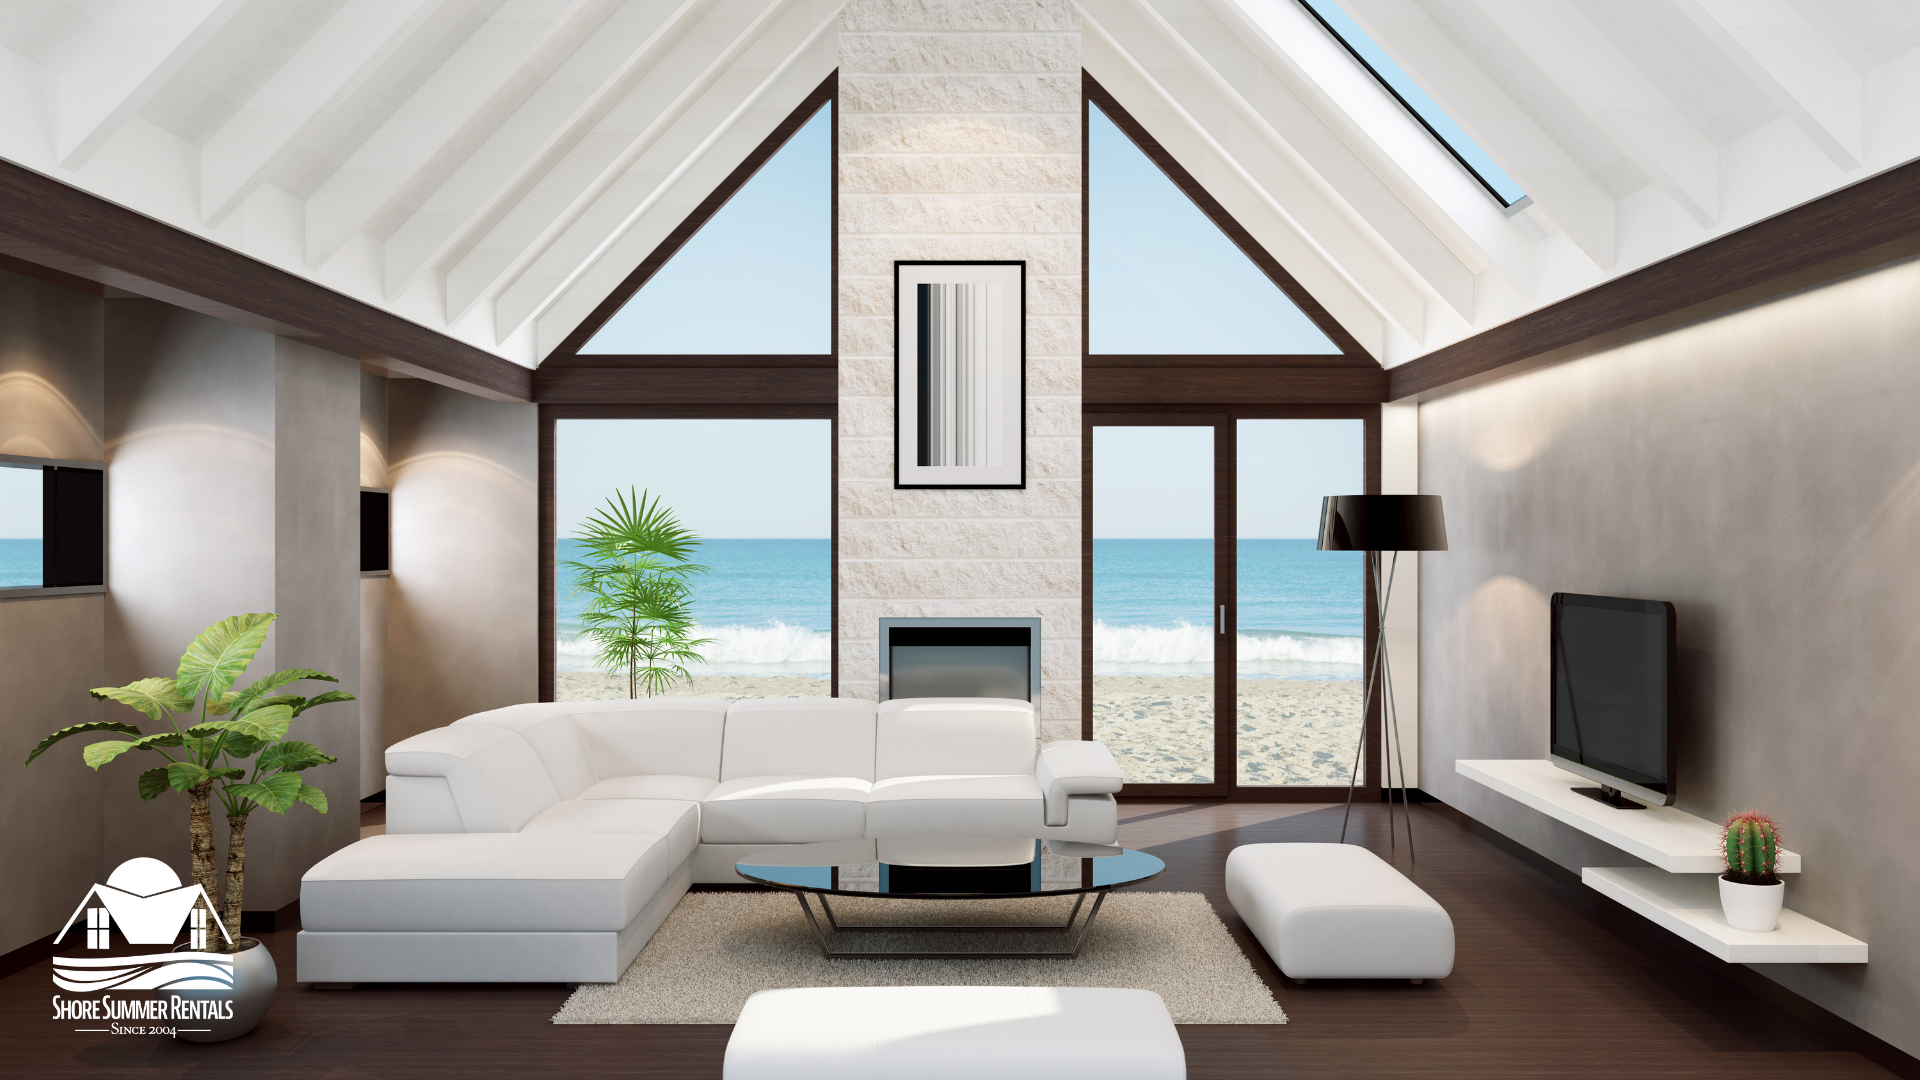 5 Interior Design Tips that Attract Vacation Rental Bookings